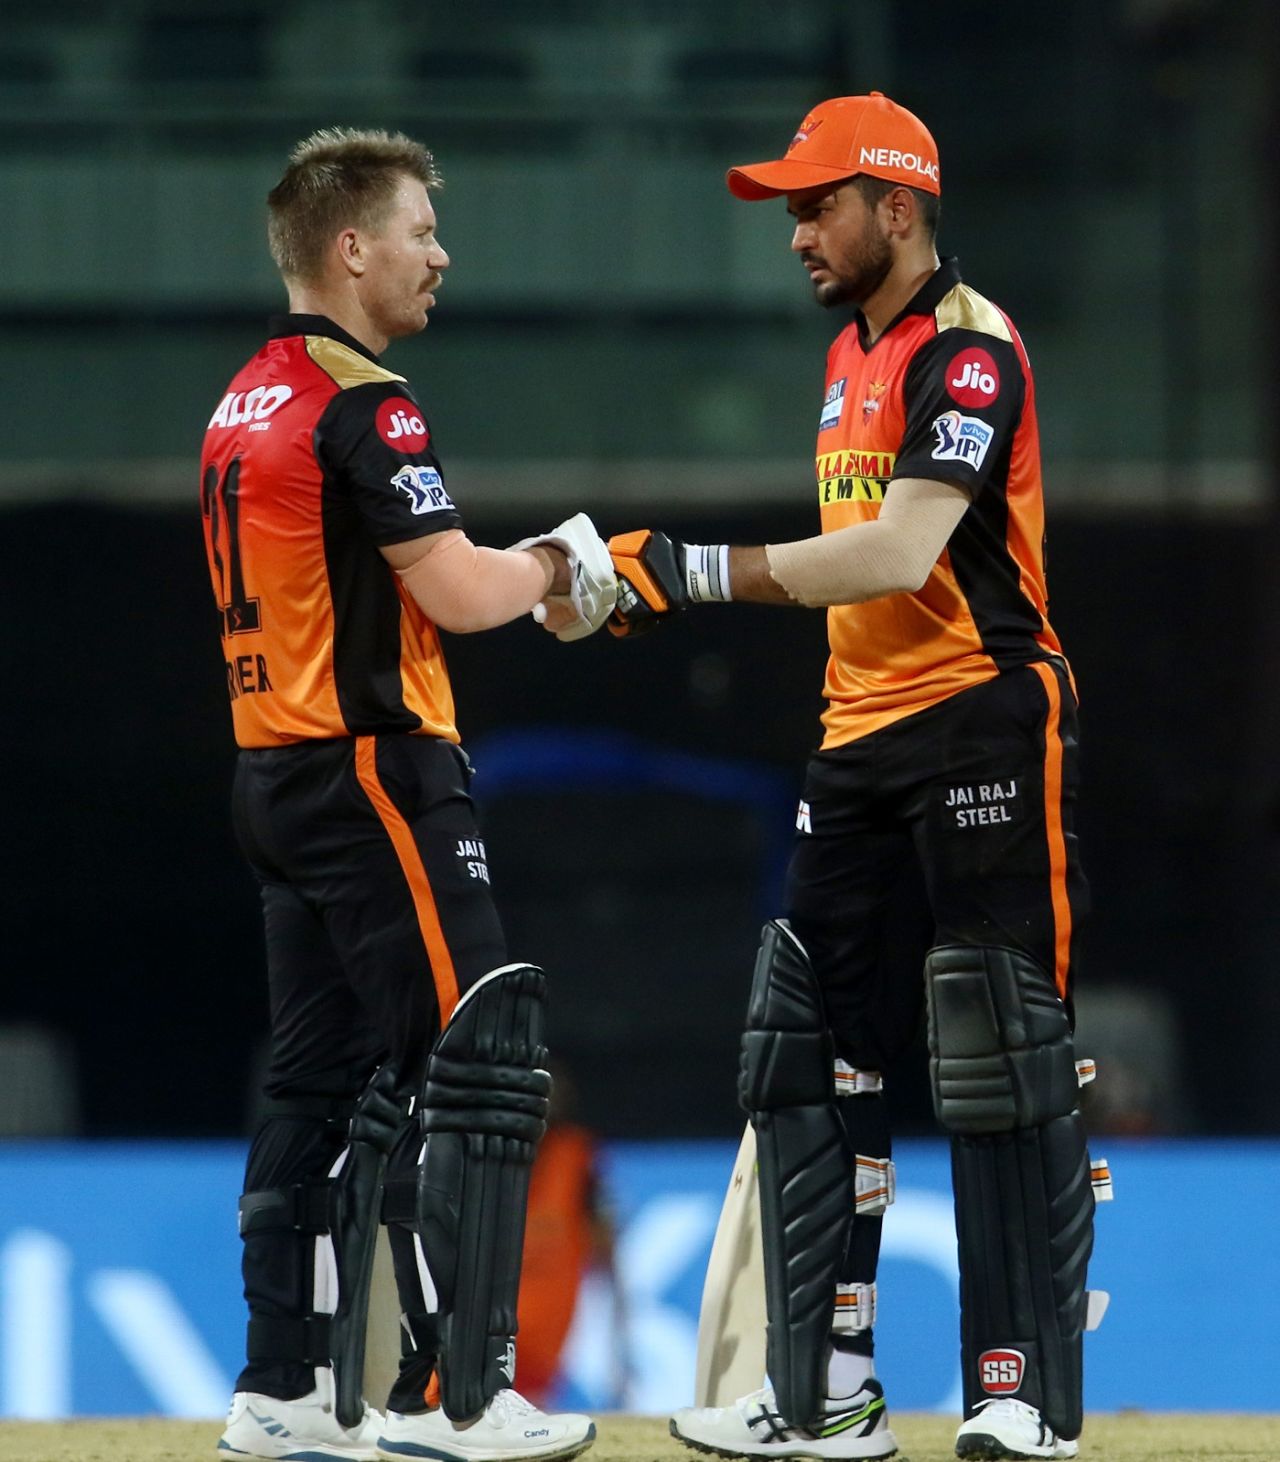 David Warner and Manish Pandey put on a superb stand for the second wicket, Sunrisers Hyderabad vs Royal Challengers Bangalore, IPL 2021, Chennai, April 14, 2021